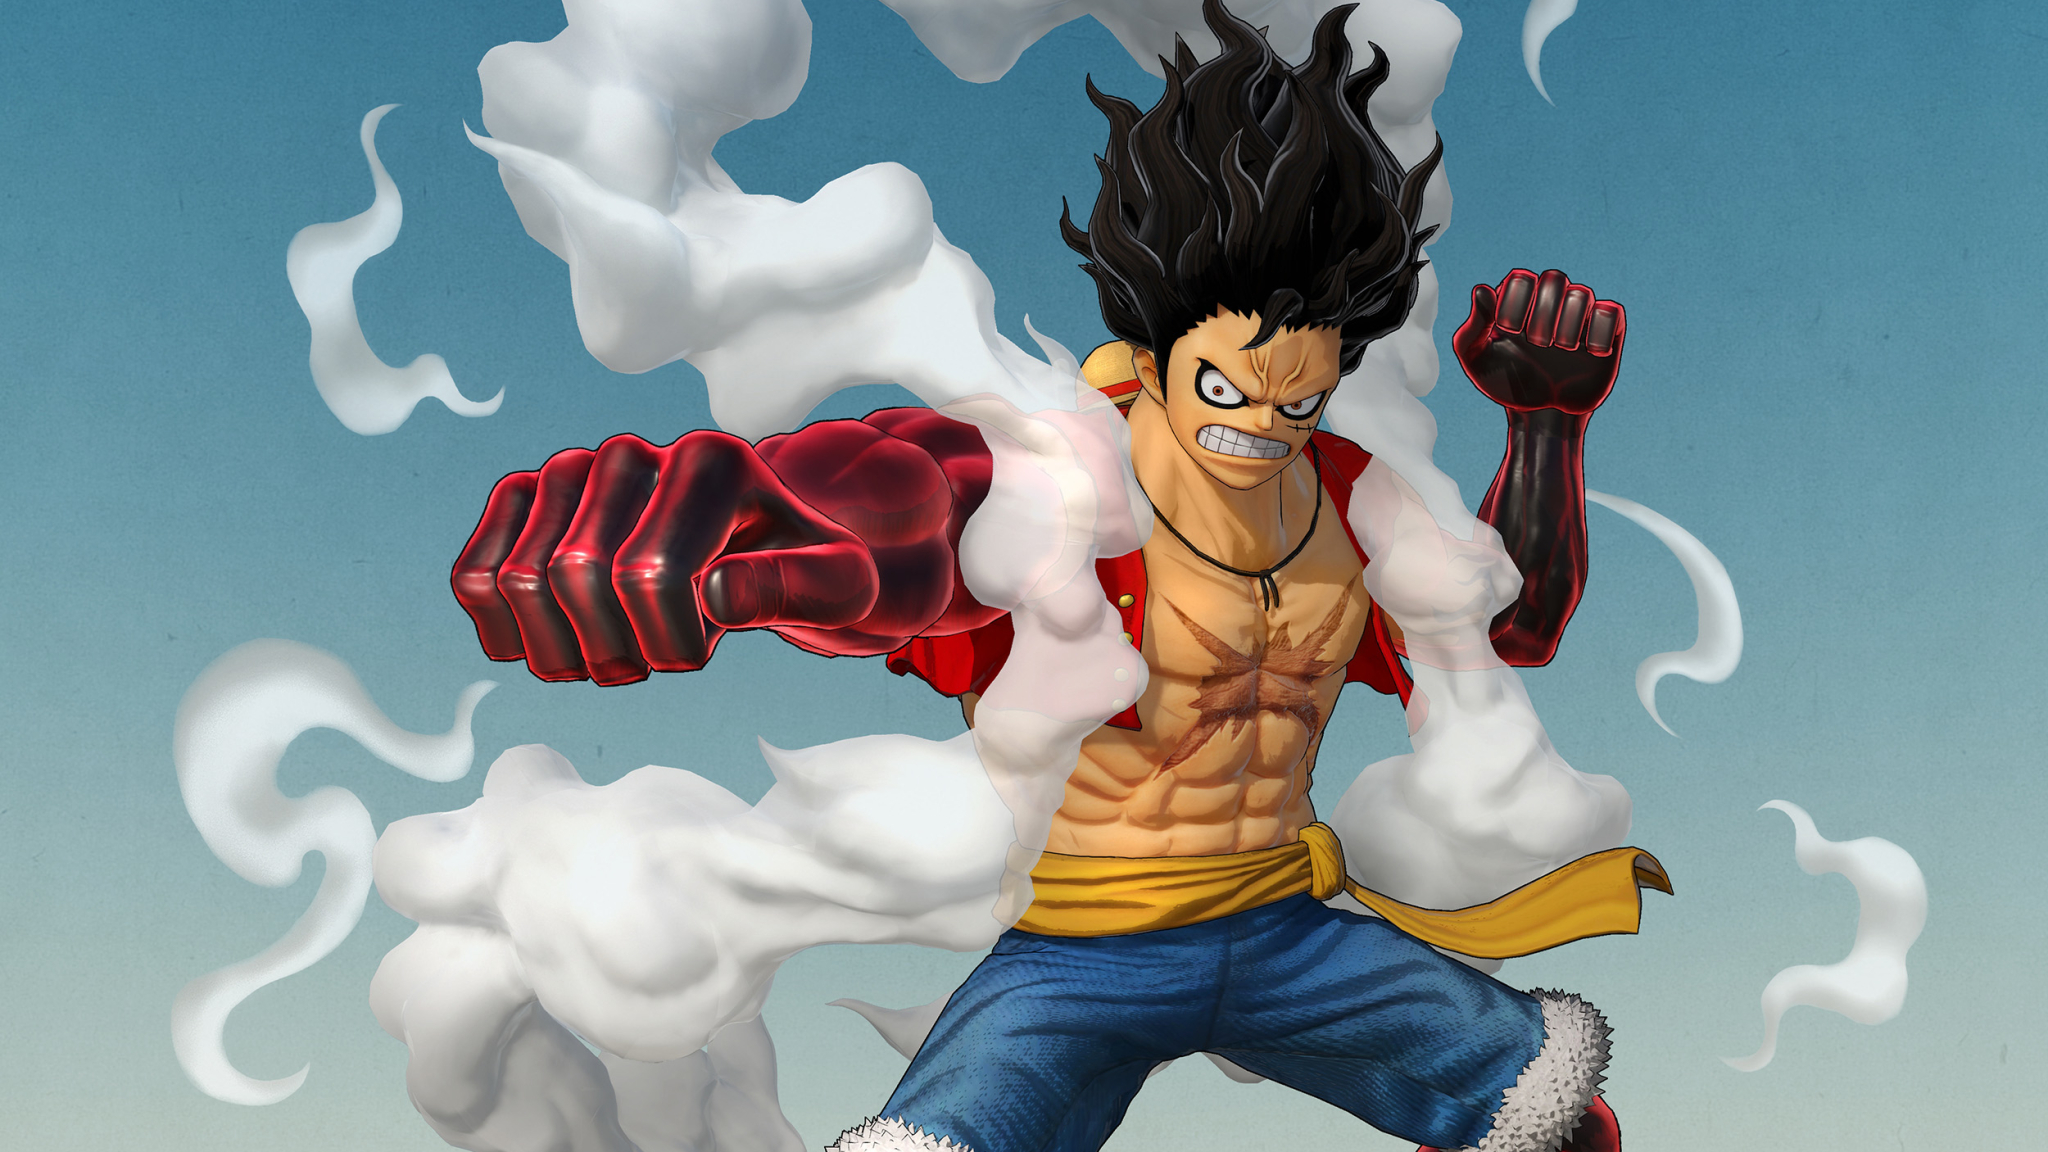 48x1152 Luffy Snakeman One Piece Game 48x1152 Resolution Wallpaper Hd Games 4k Wallpapers Images Photos And Background Wallpapers Den